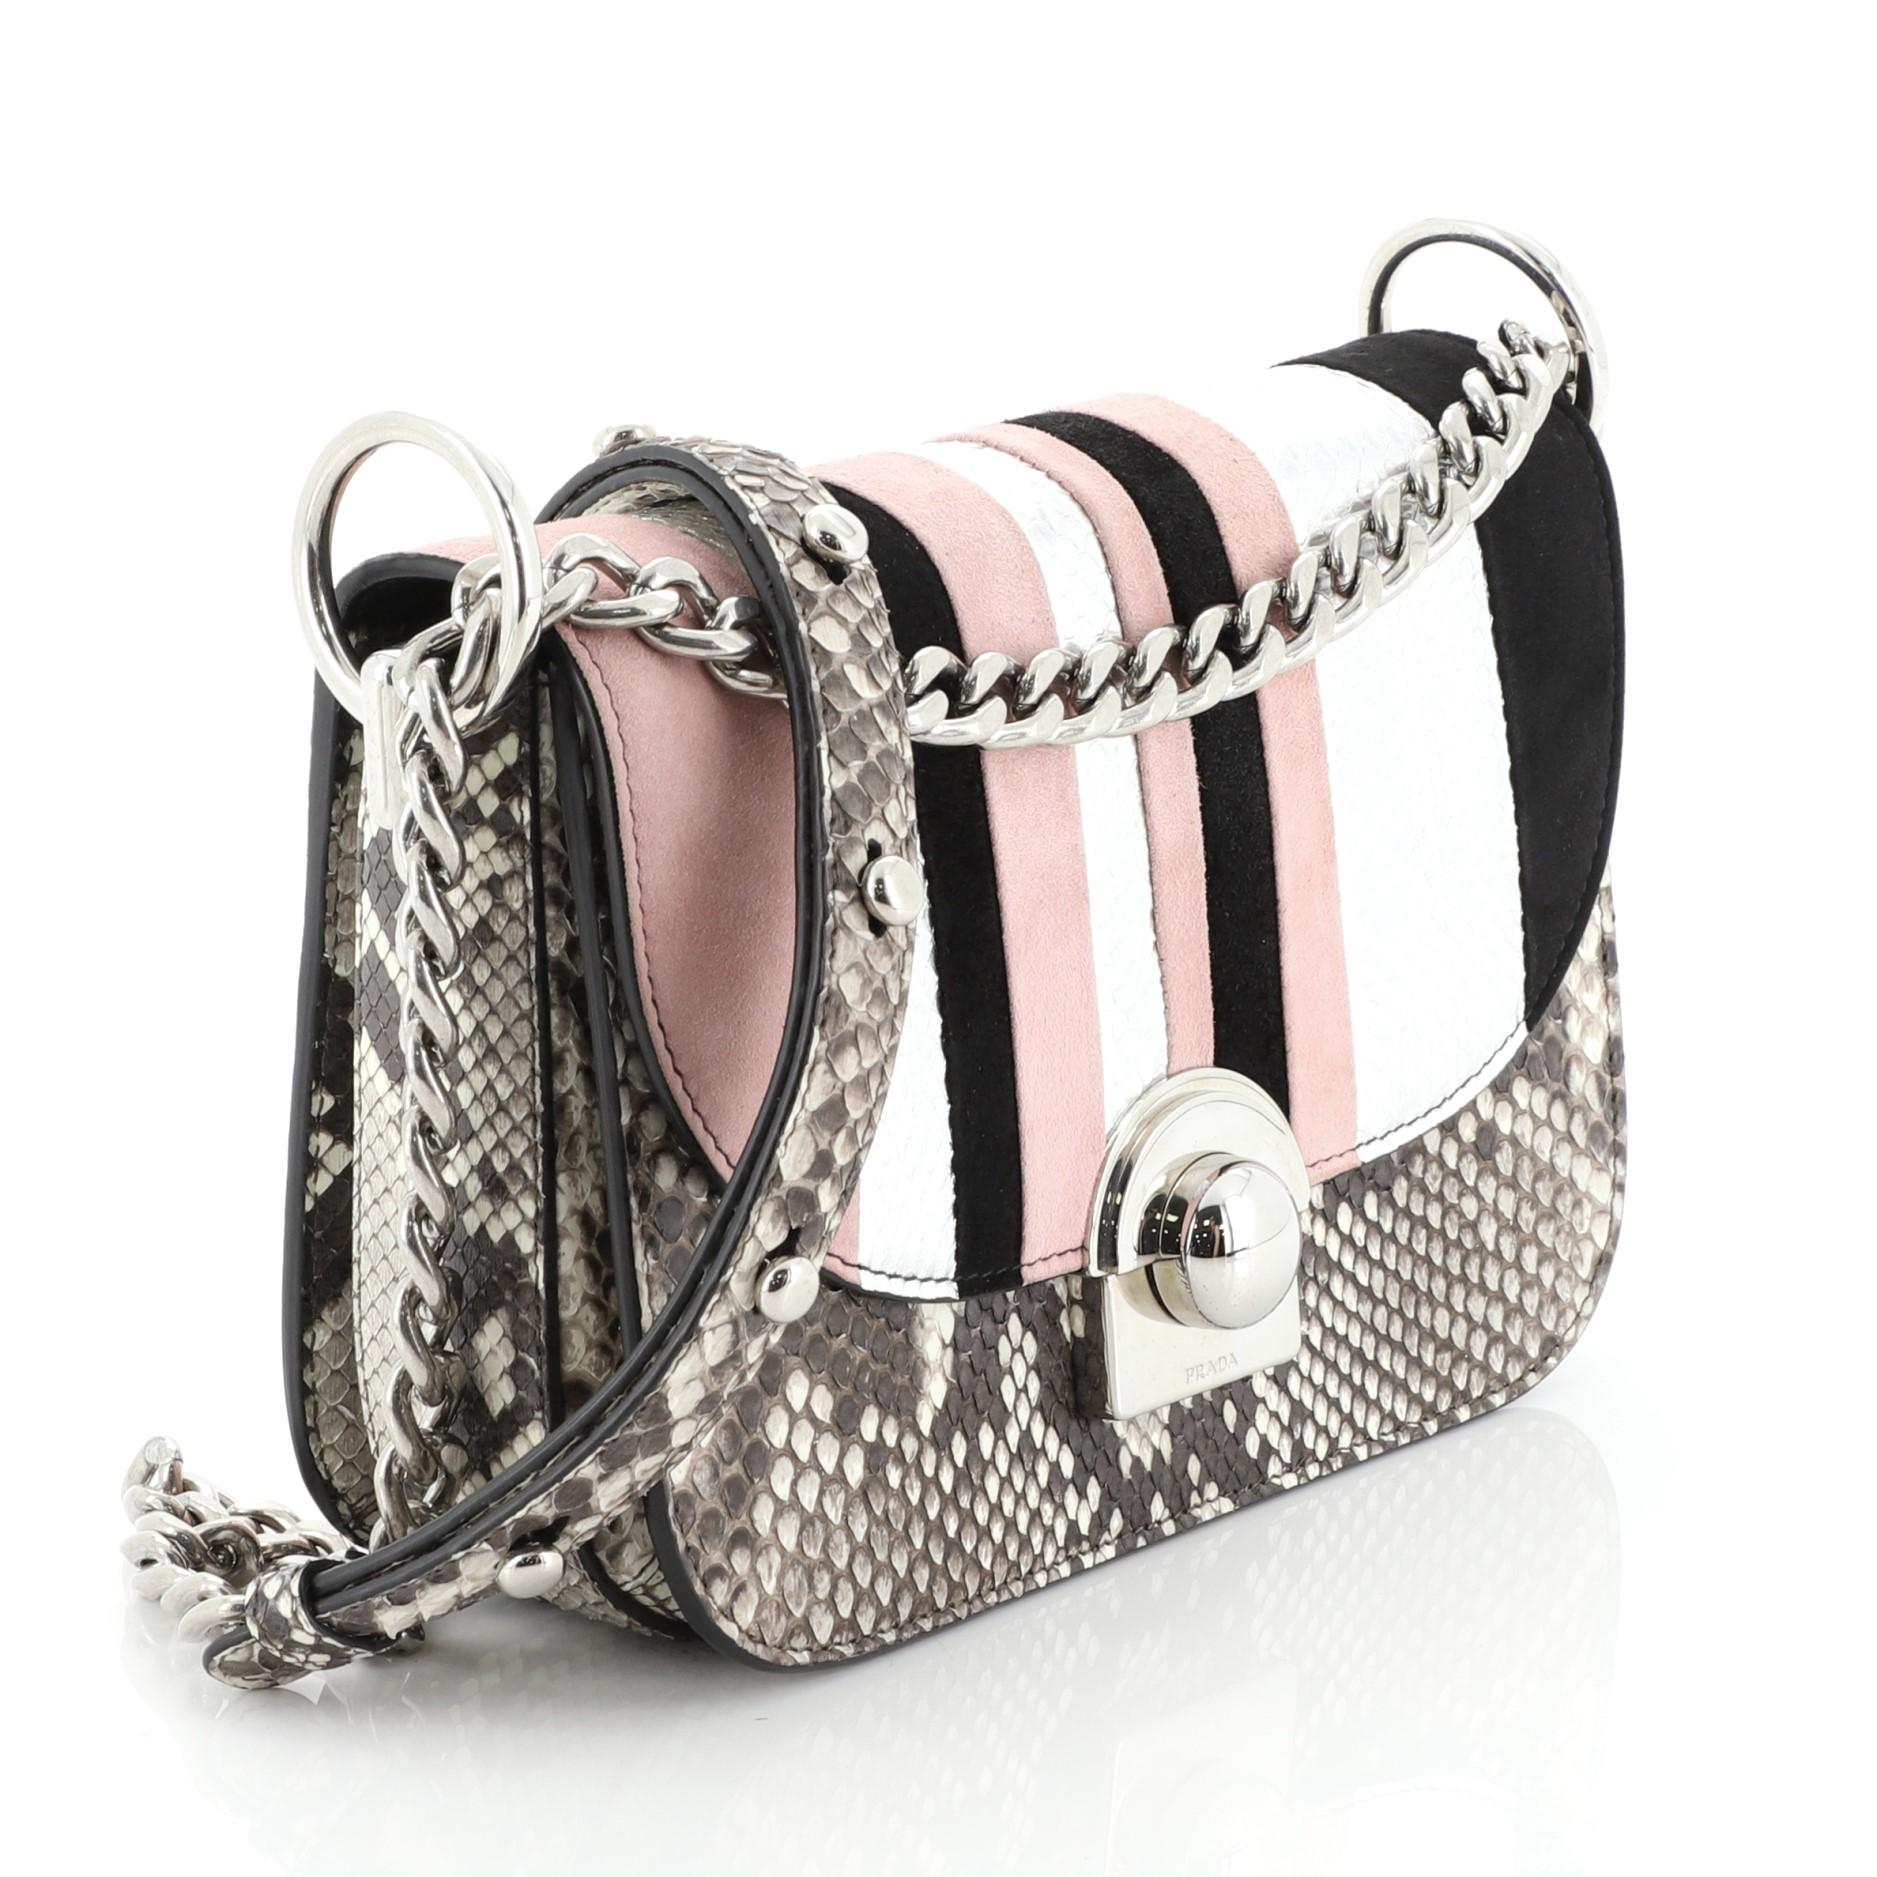 This Prada Arcade Chain Crossbody Python and Suede, crafted from pink and multicolor genuine python and suede, features sliding chain-link strap with shoulder pad and silver-tone hardware. Its snap-lock clasp closure opens to a black leather